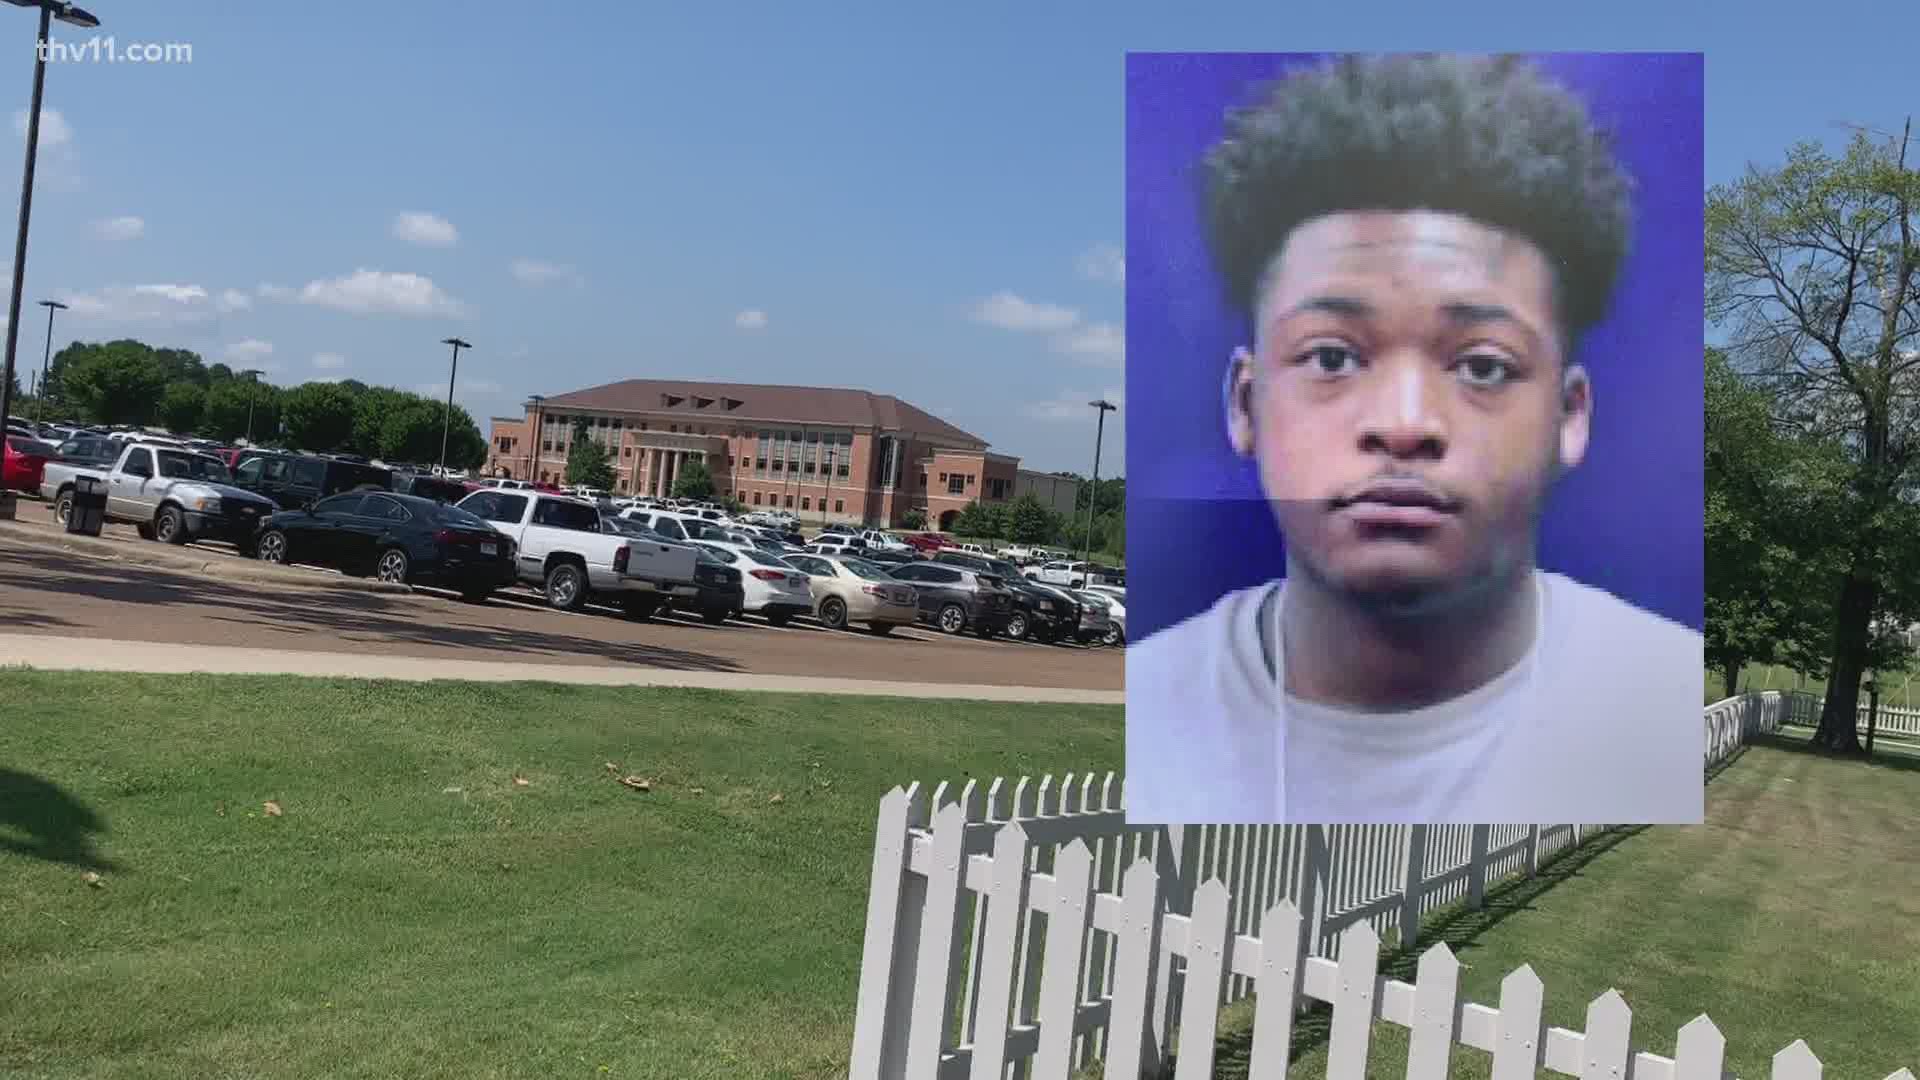 A senior at Southern Arkansas University is dead after being shot in a campus parking lot on the night before the start of class. It was a trying day in Magnolia.